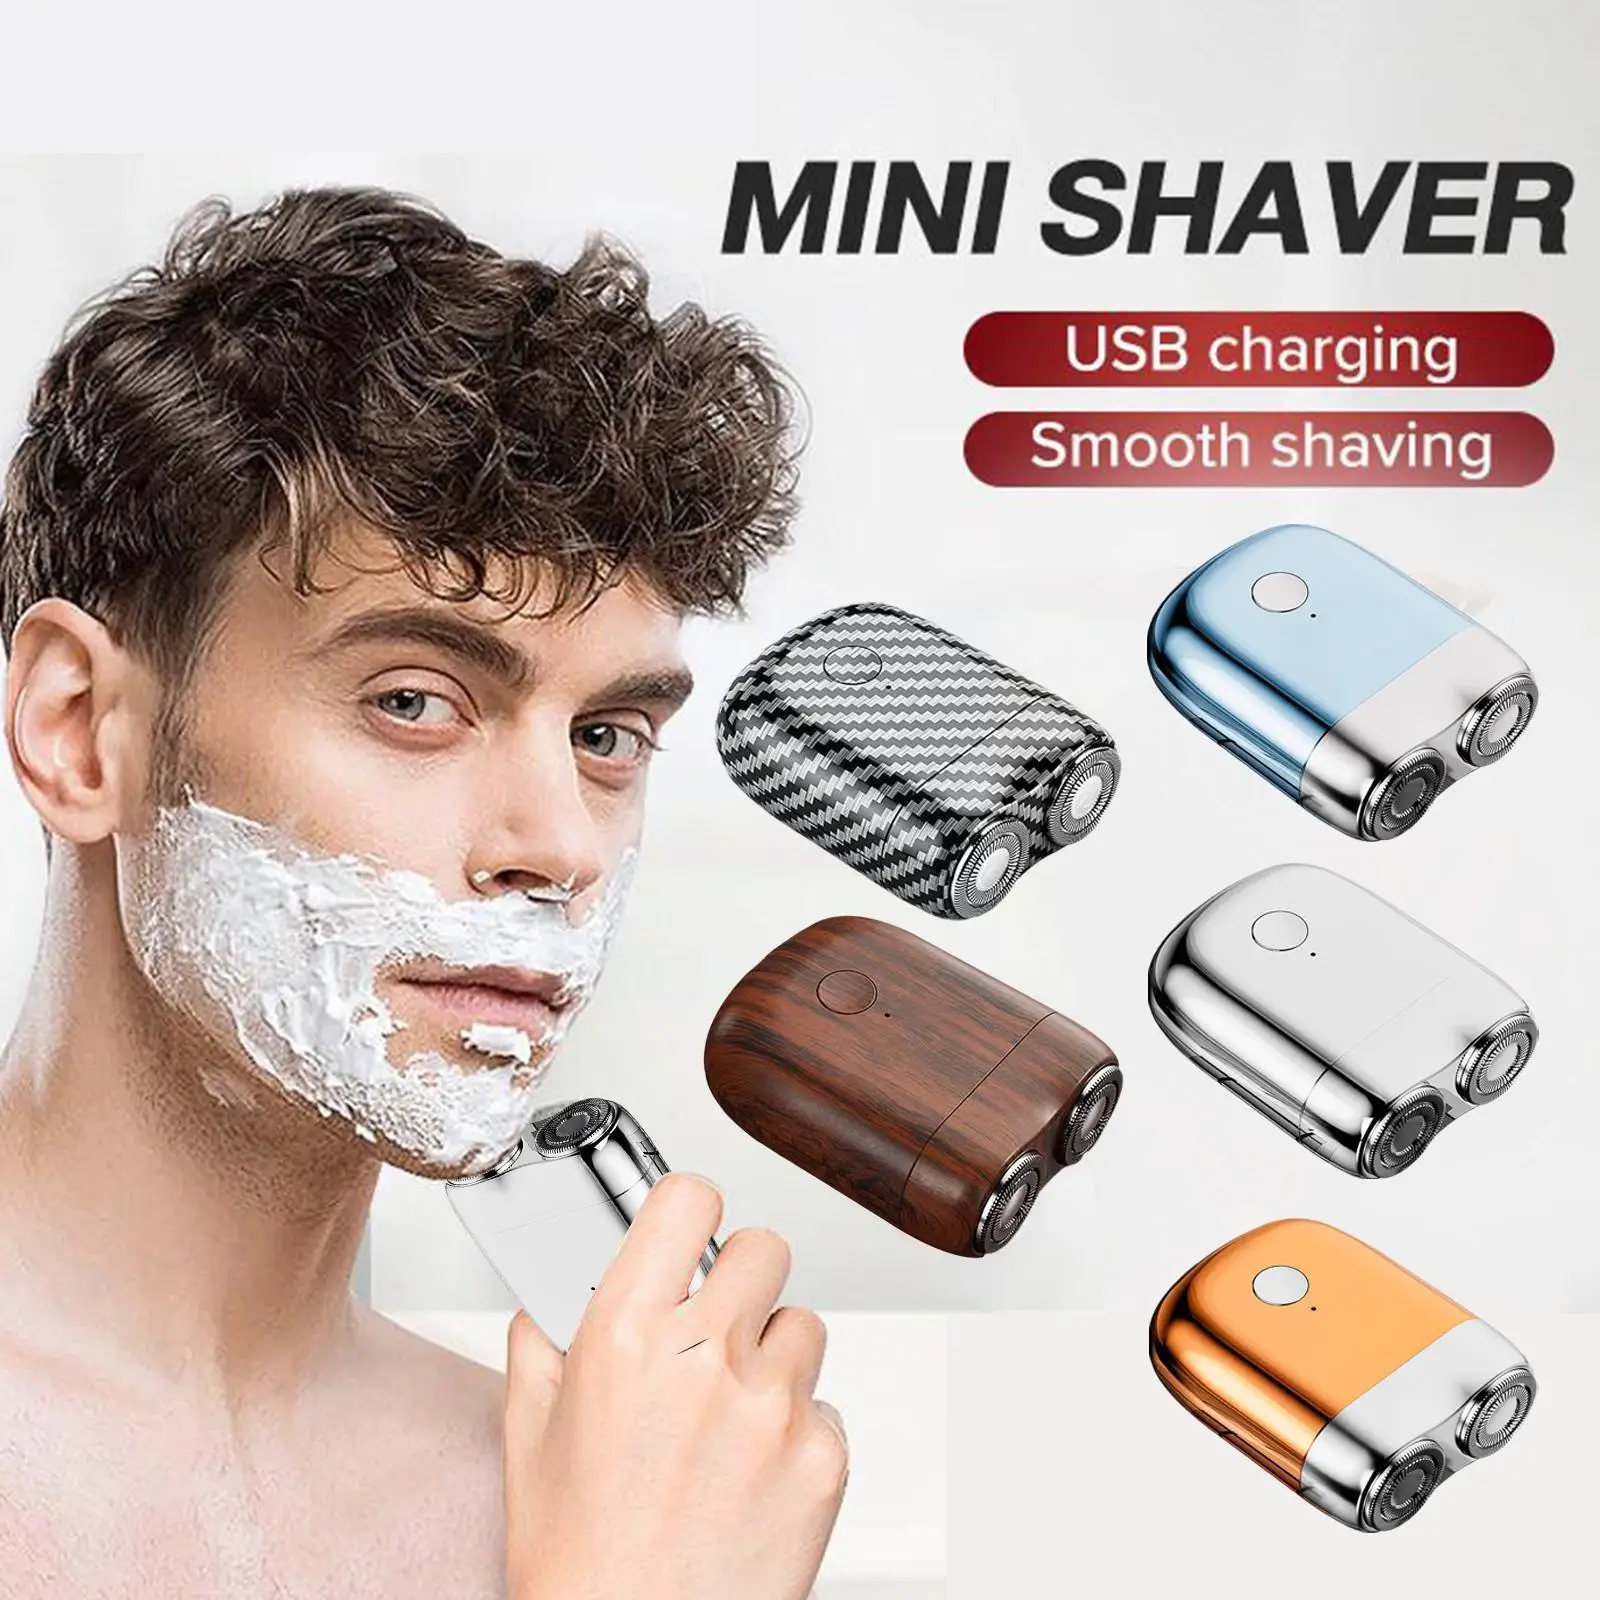 USB Rechargeable Electric Shaver Mini Portable Face Cordless Shavers Wet & Dry Painless Small Size Machine Shaving For Men S6H7